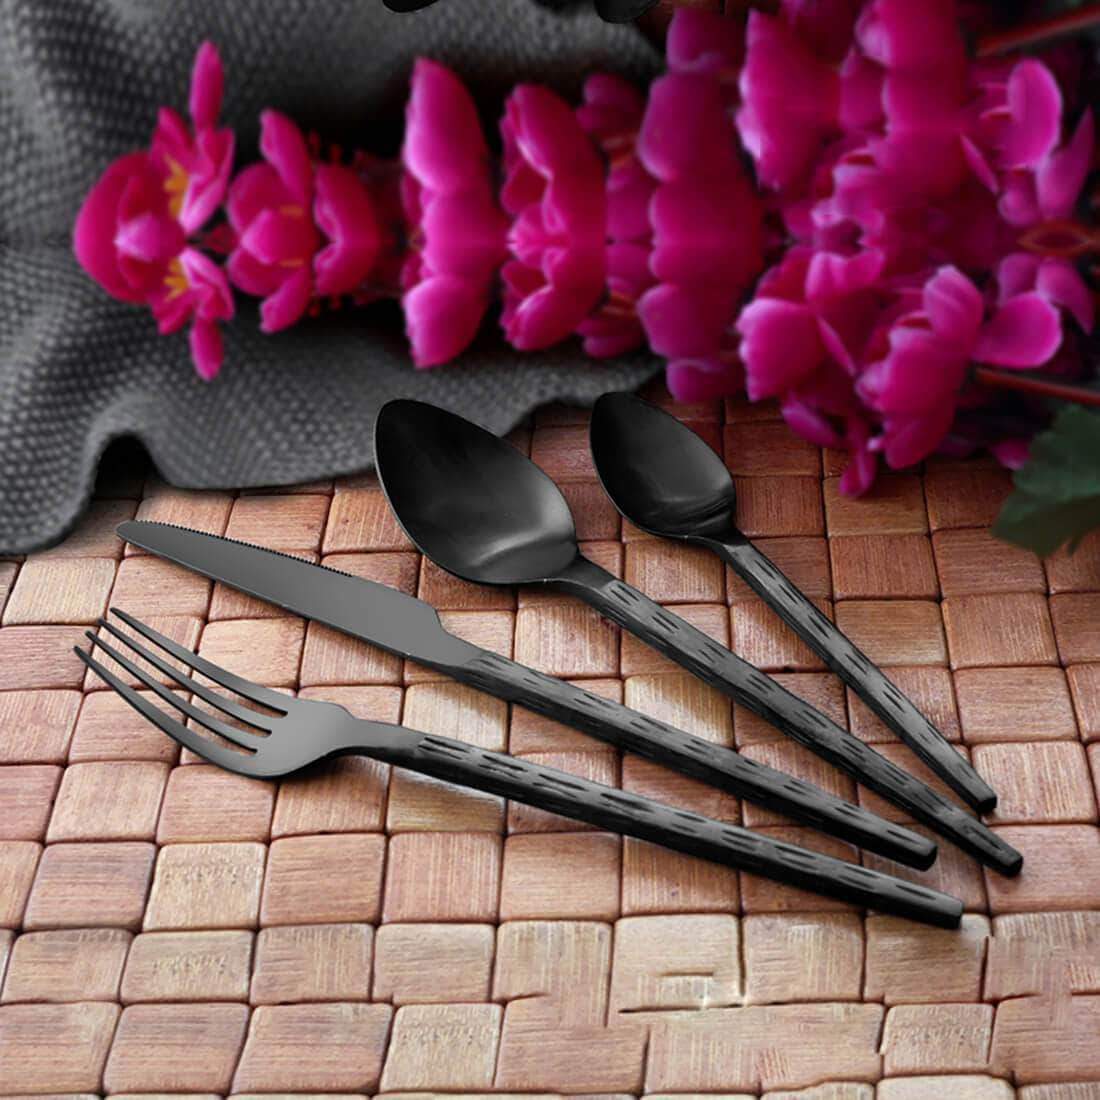 Jagdamba Cutlery Pvt Ltd. Cutlery Black 24 PCS Cutlery Set with PVD Coating - Rod Rice Hammered - Hand Crafted